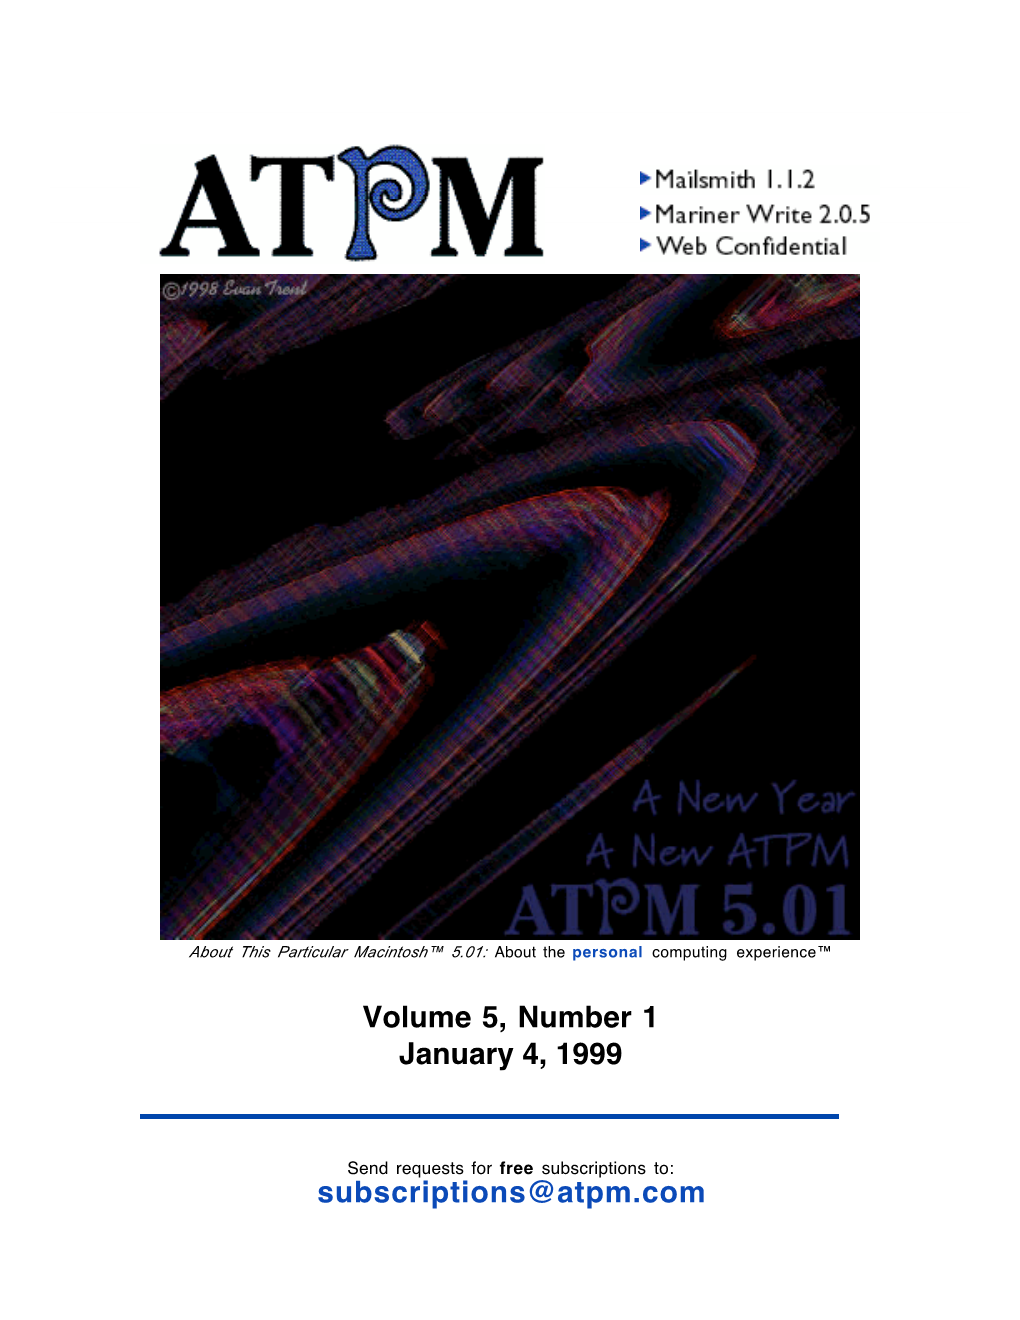 Volume 5, Number 1 January 4, 1999 Subscriptions@Atpm.Com